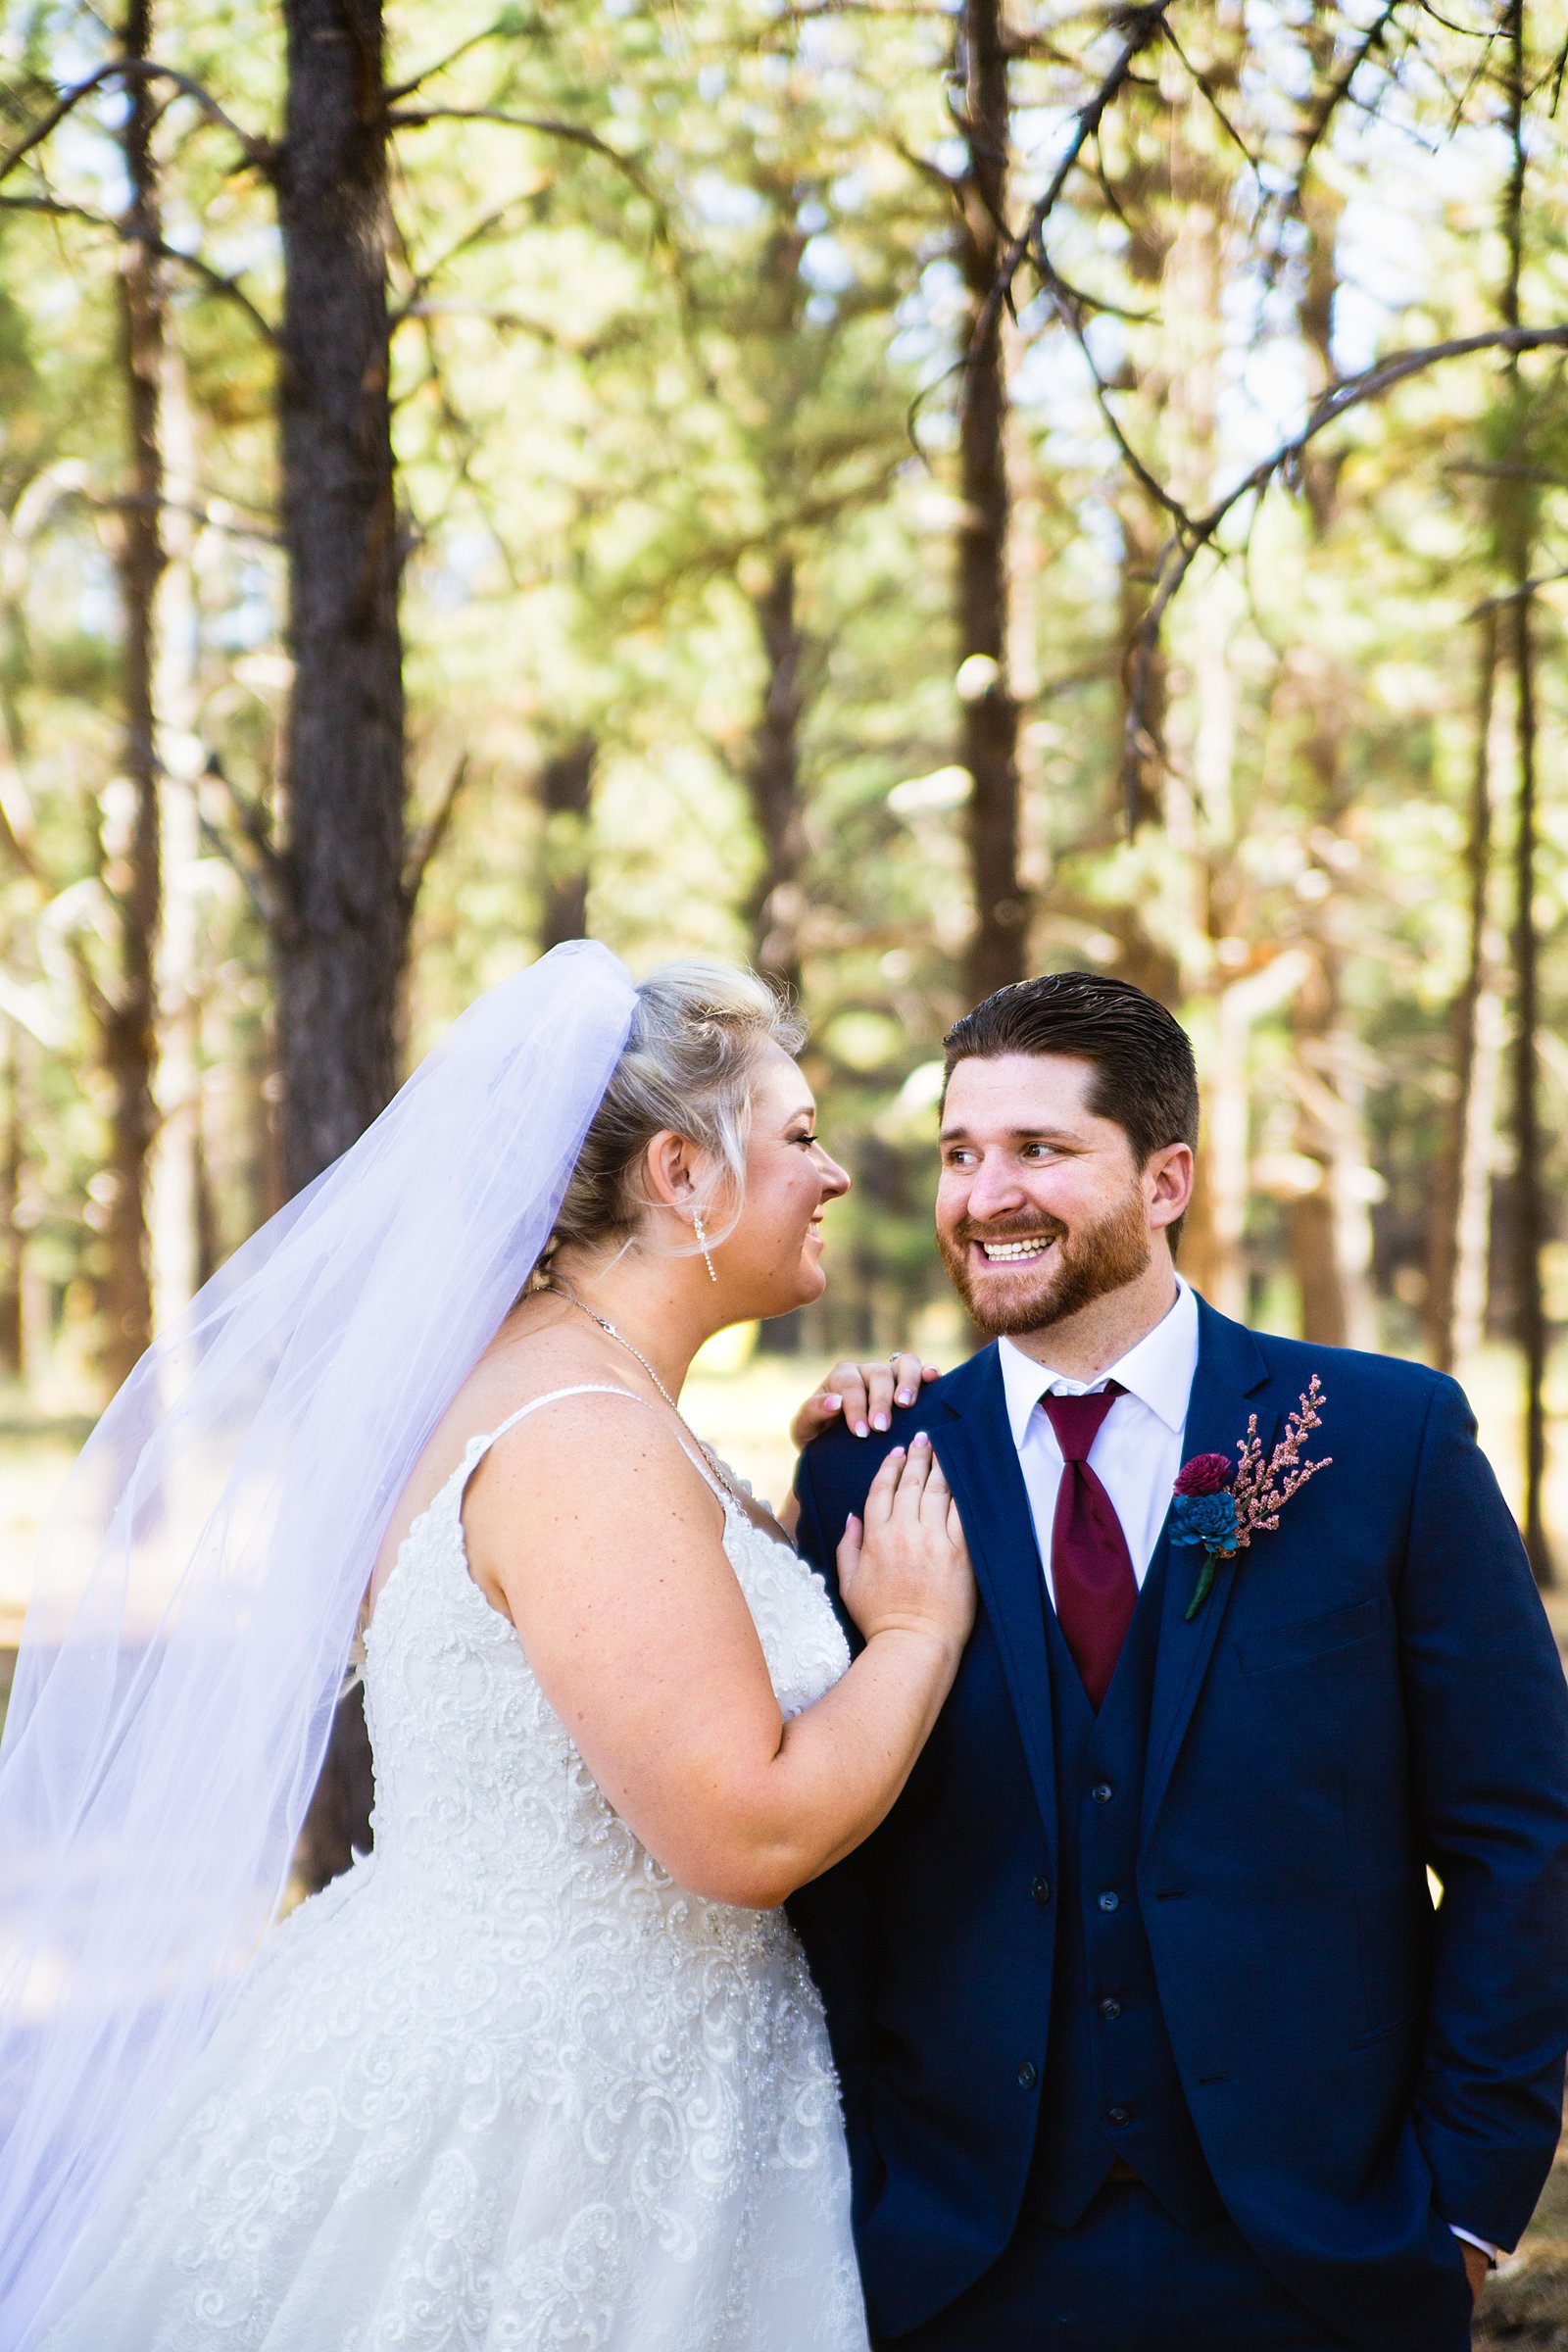 Bride and Groom laughing together during their Chapel of the Holy Dove wedding by Flagstaff wedding photographer PMA Photography.